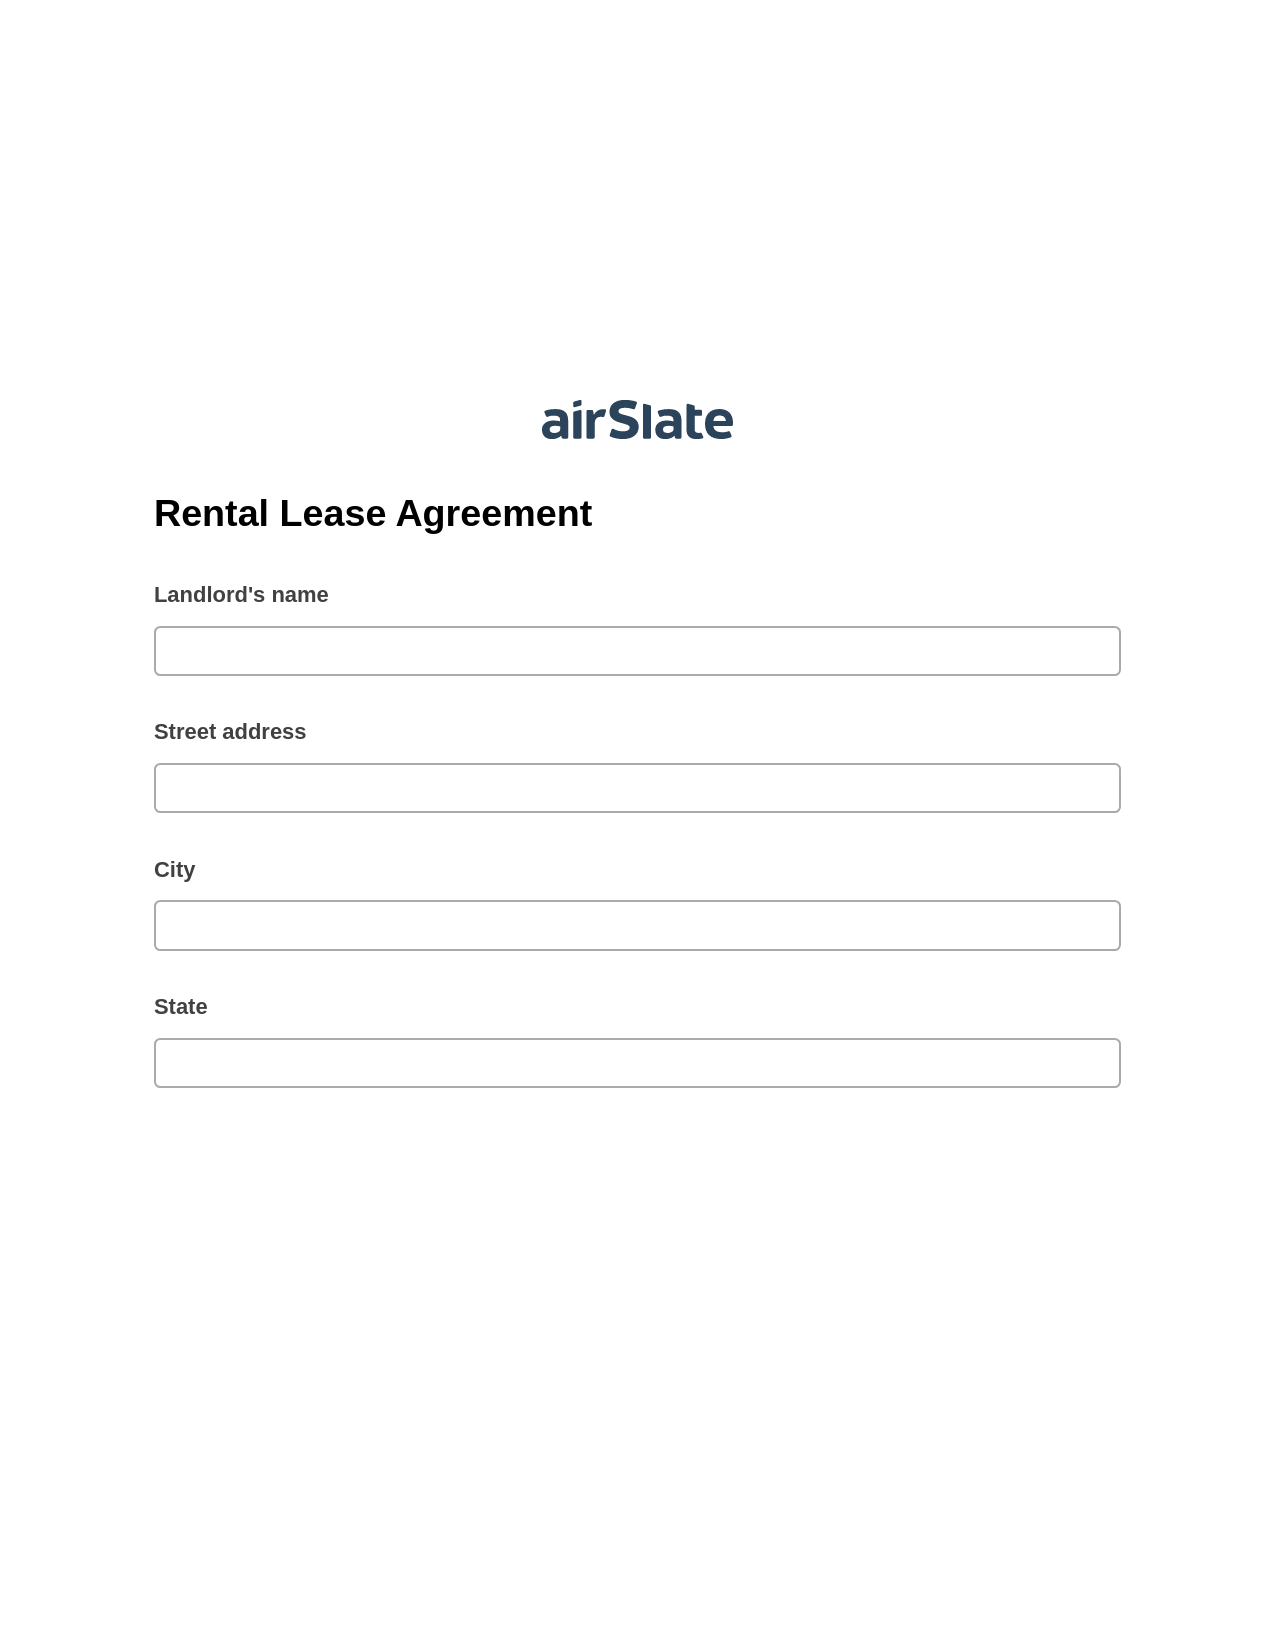 Rental Lease Agreement Pre-fill from Google Sheet Dropdown Options Bot, Jira Bot, Email Notification Postfinish Bot